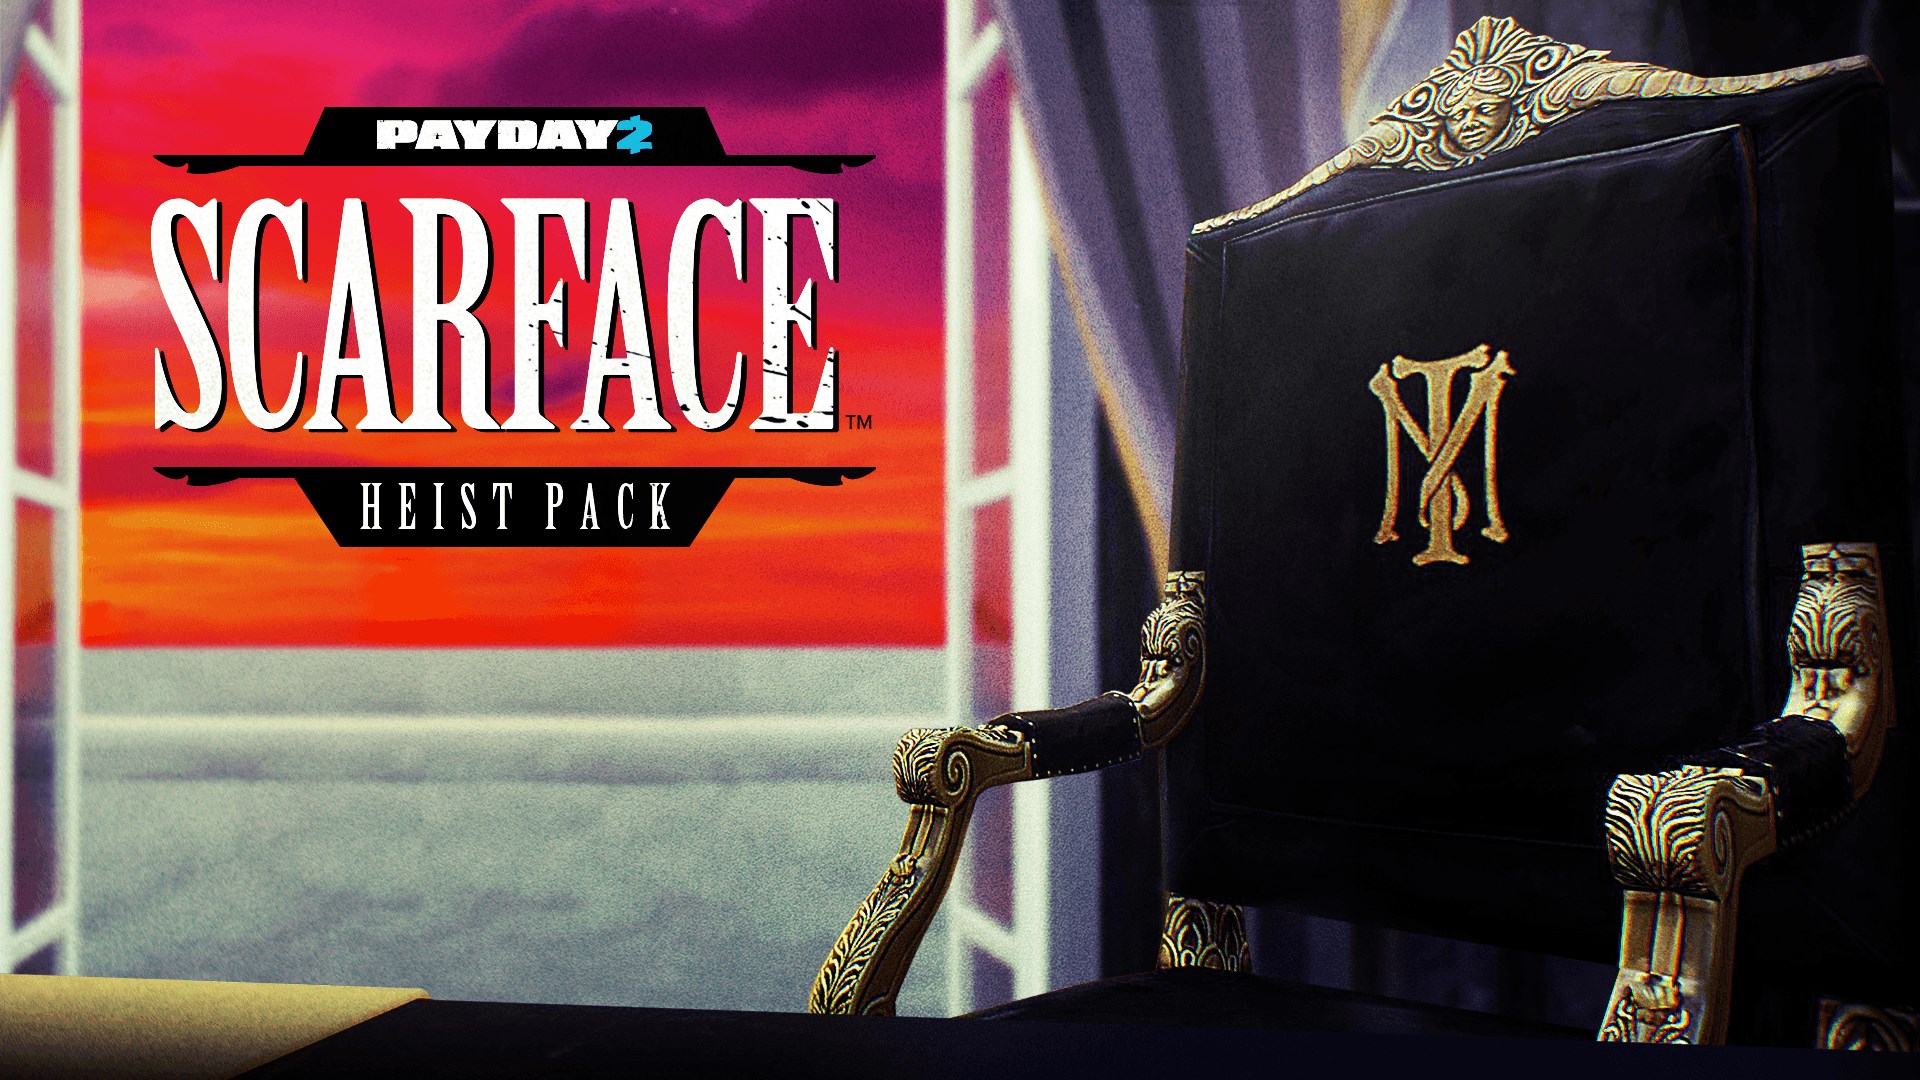 payday 2 scarface download free